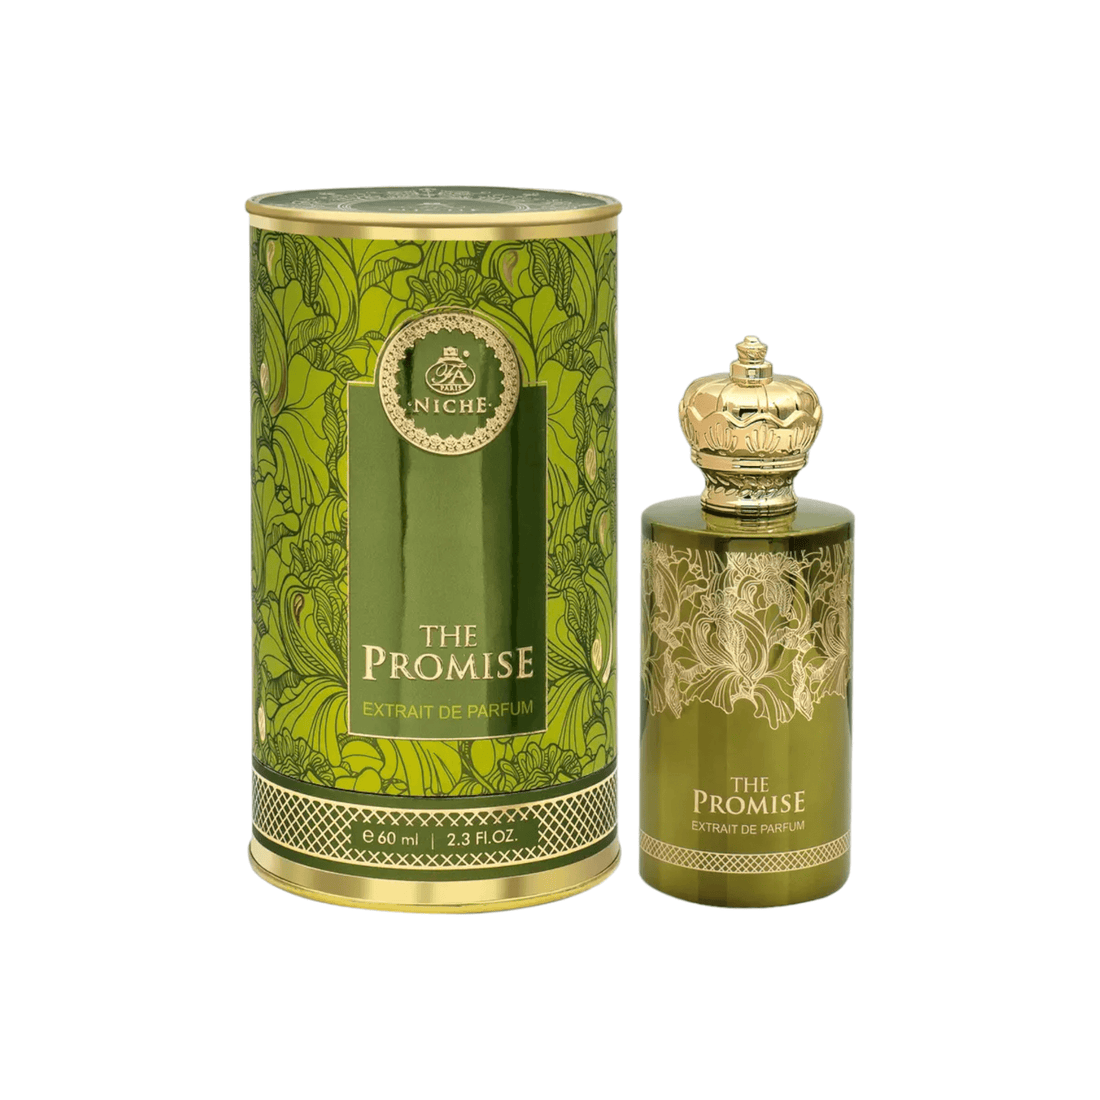 Elegant 60ml bottle of The Promise Extrait De Parfum by FA Paris Niche, embodying a blend of exotic and luxurious scents.